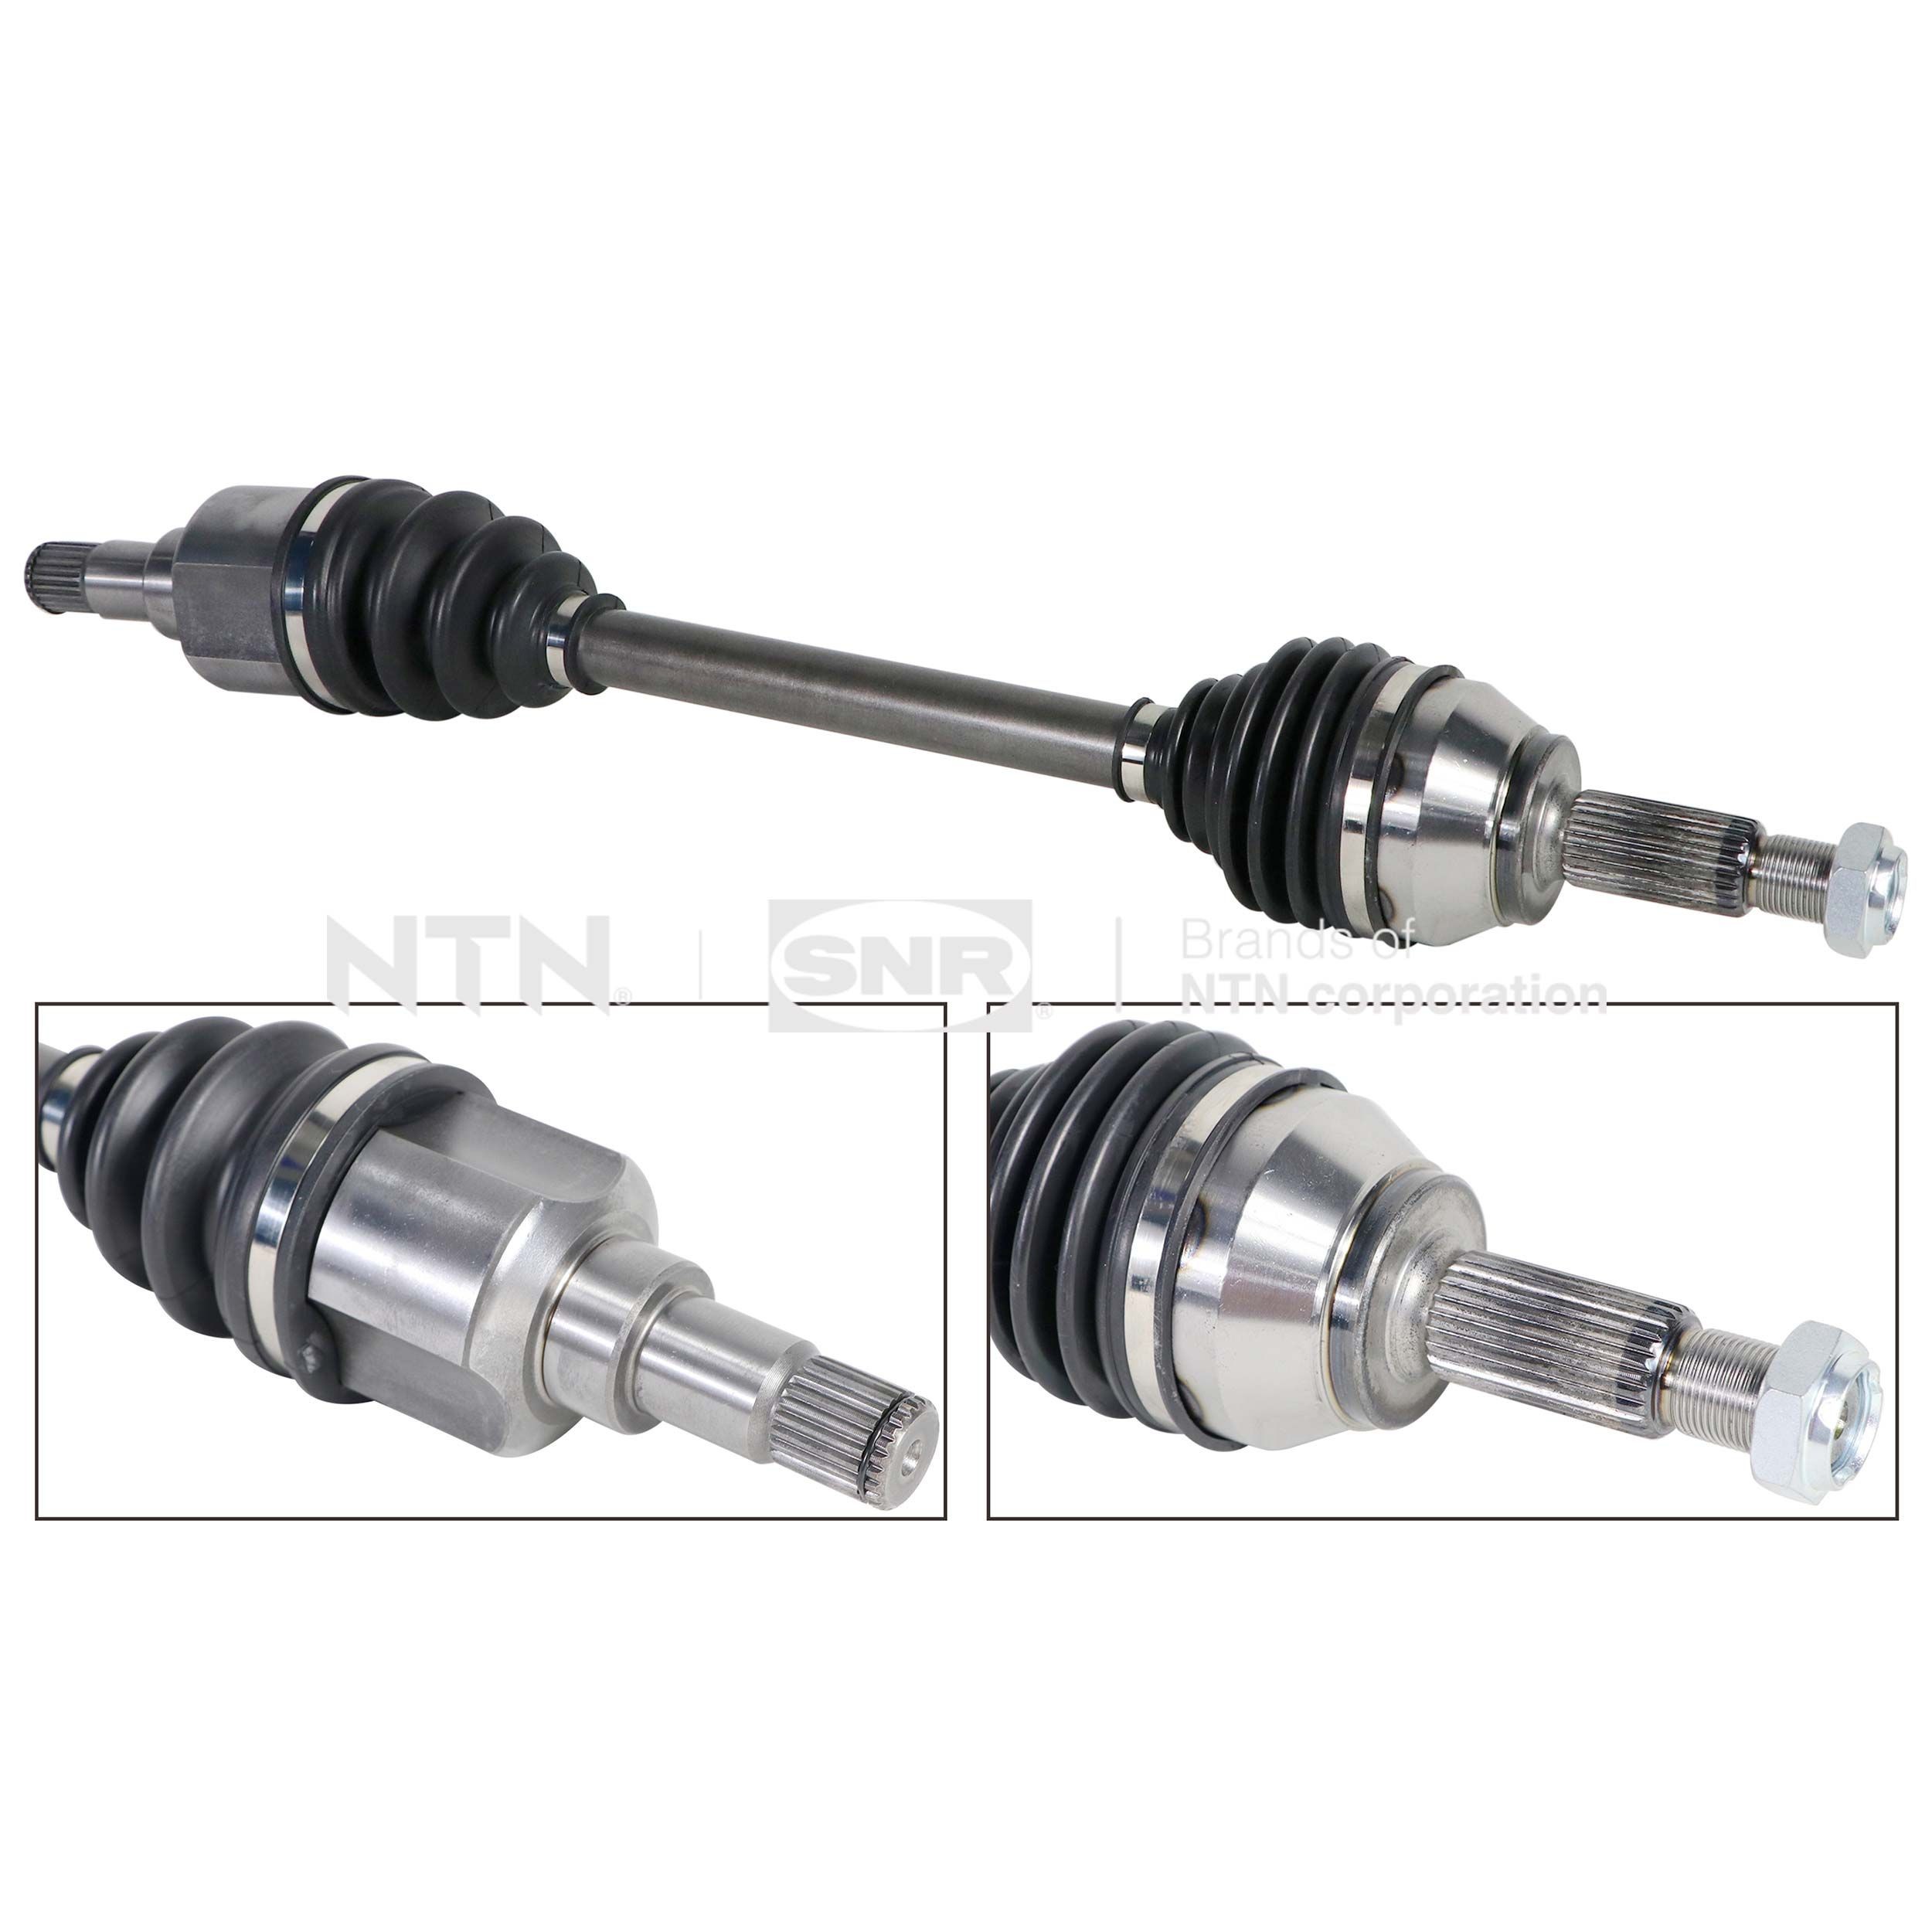 SNR Front Axle Left, 621mm Length: 621mm, External Toothing wheel side: 25 Driveshaft DK52.014 buy